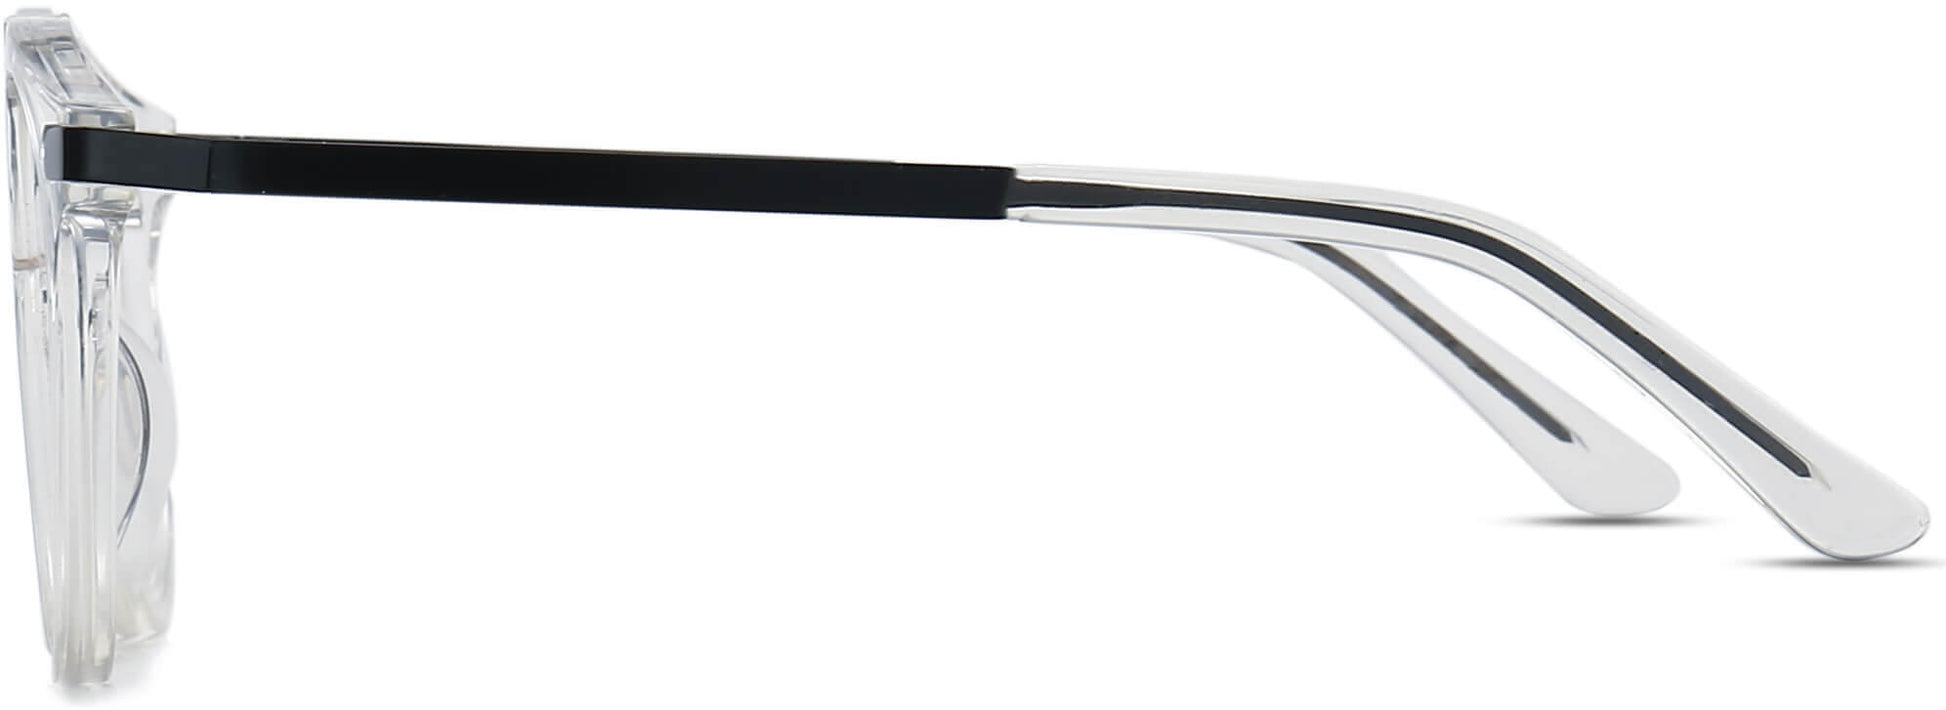 Finley Round Clear Eyeglasses from ANRRI, side view